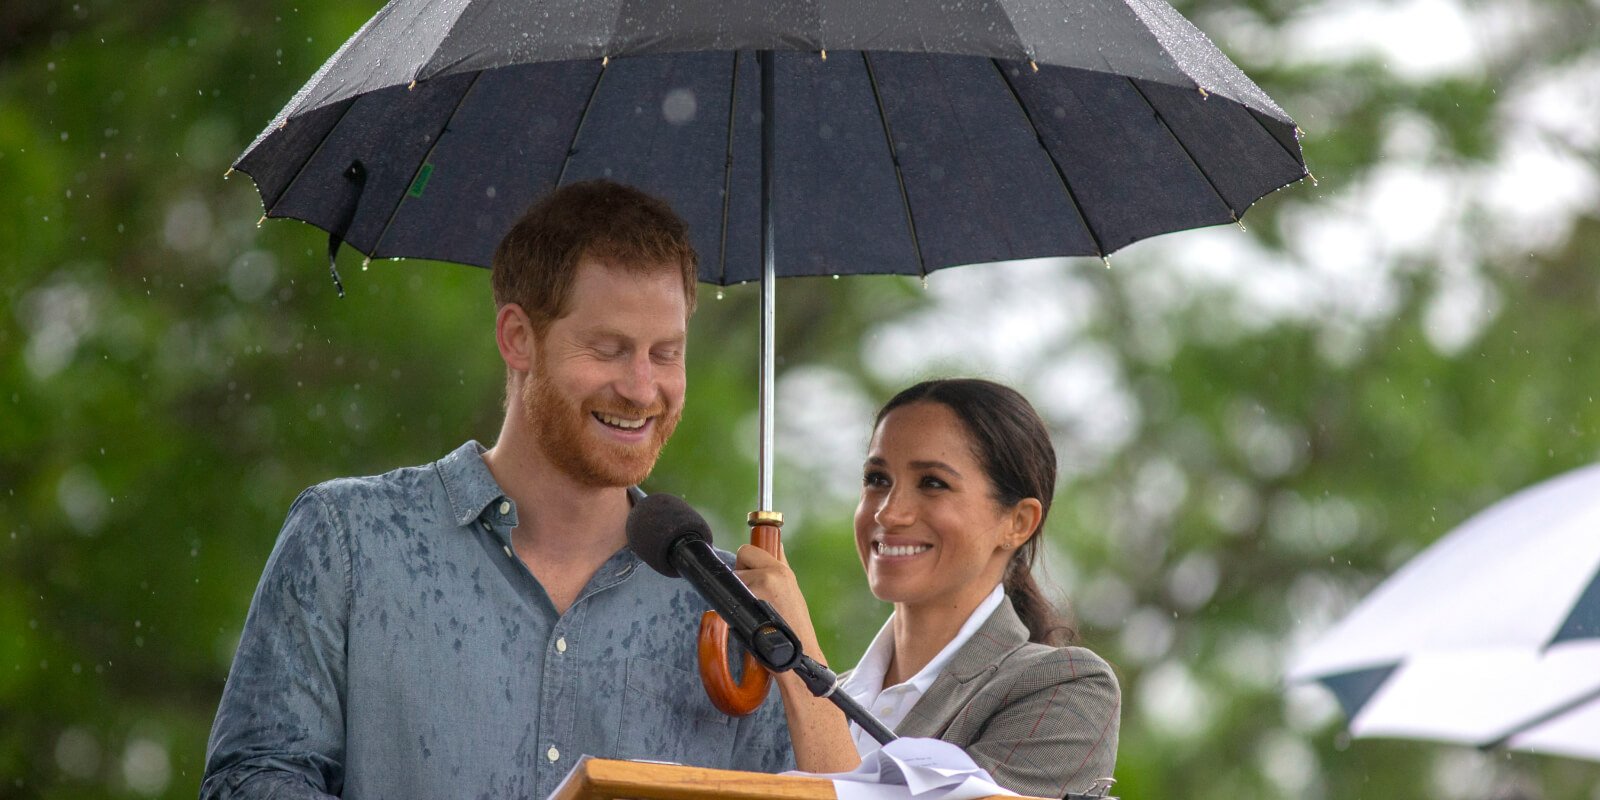 Prince Harry and Meghan Markle appear at a community picnic in Victoria Park in Dubbo, New South Wales, on the second day of the royal couple's visit to Australia in 2018.